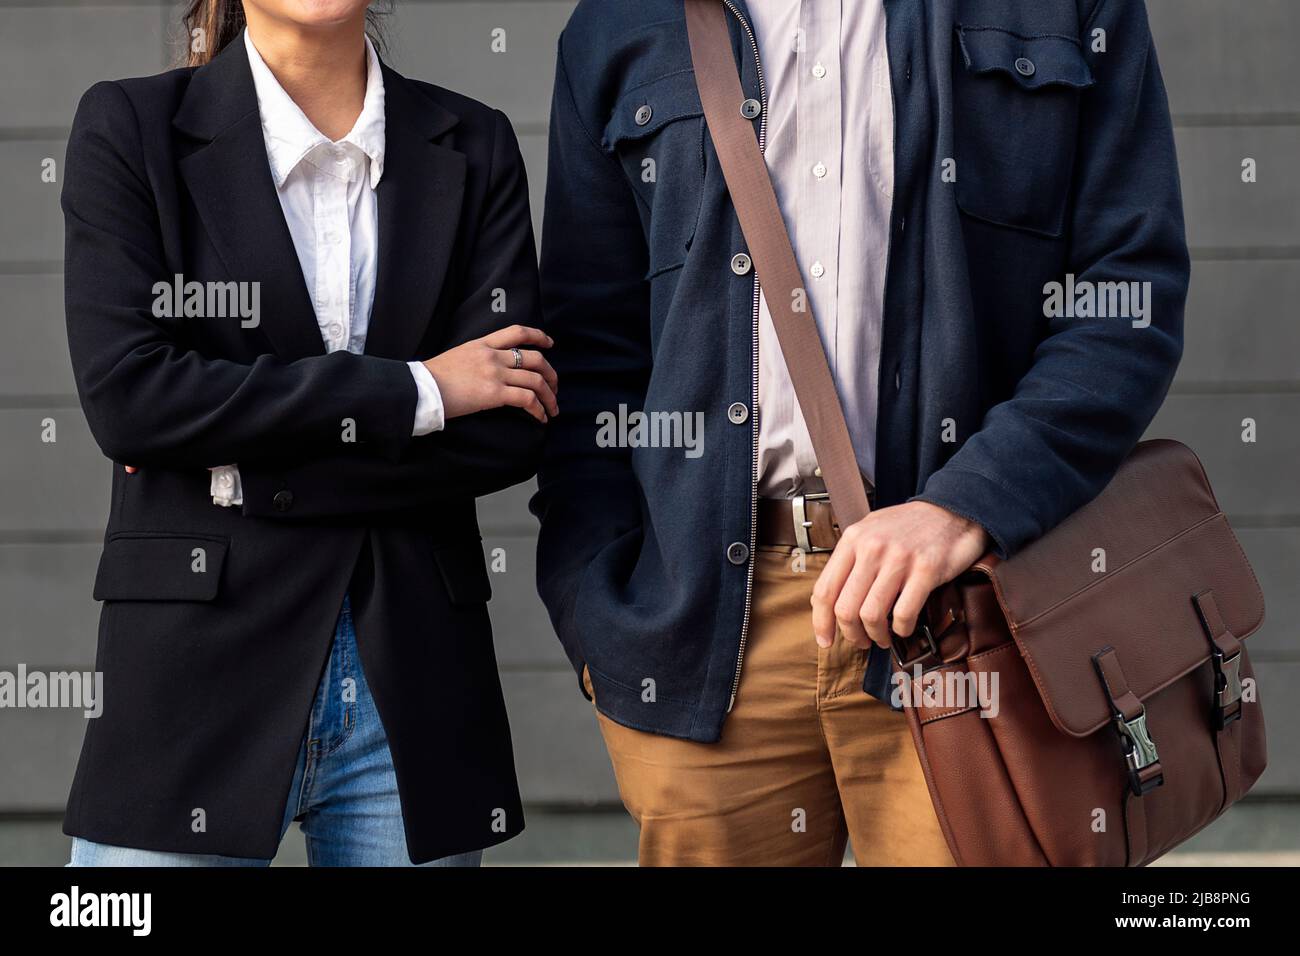 unrecognizable business man and business woman Stock Photo